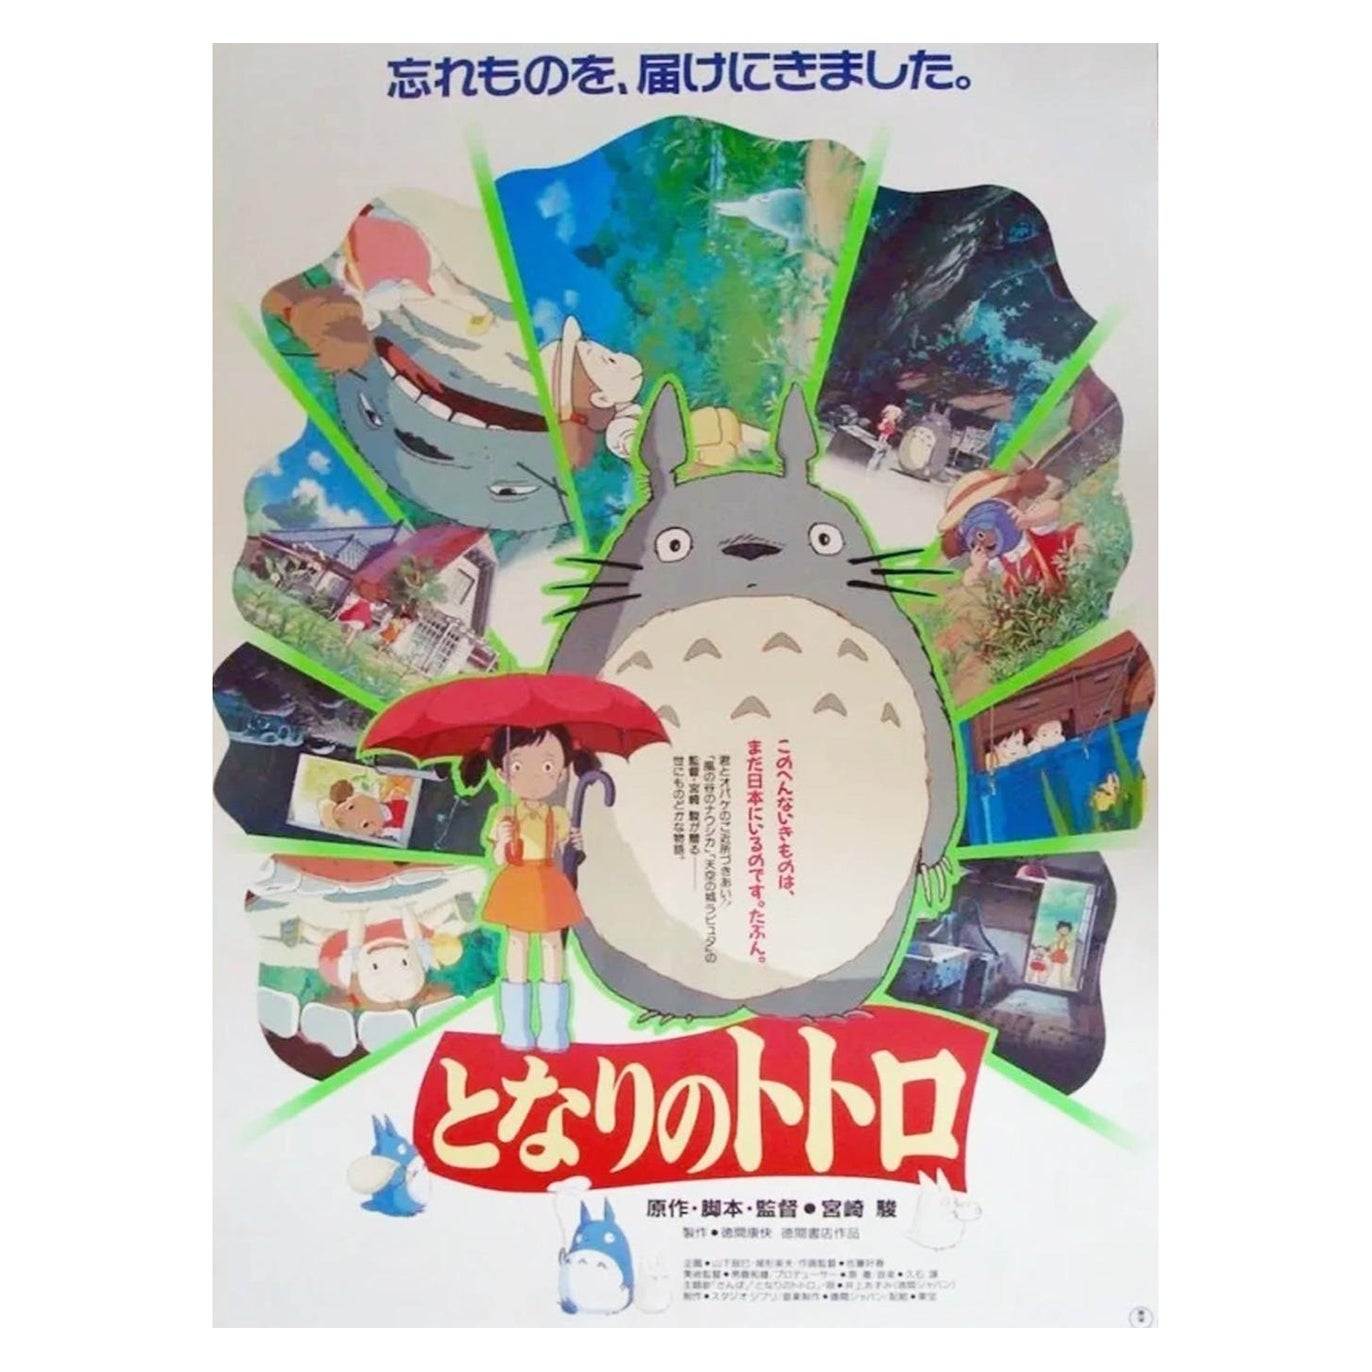 1988 My Neighbour Totoro (Japanese) Original Vintage Poster For Sale